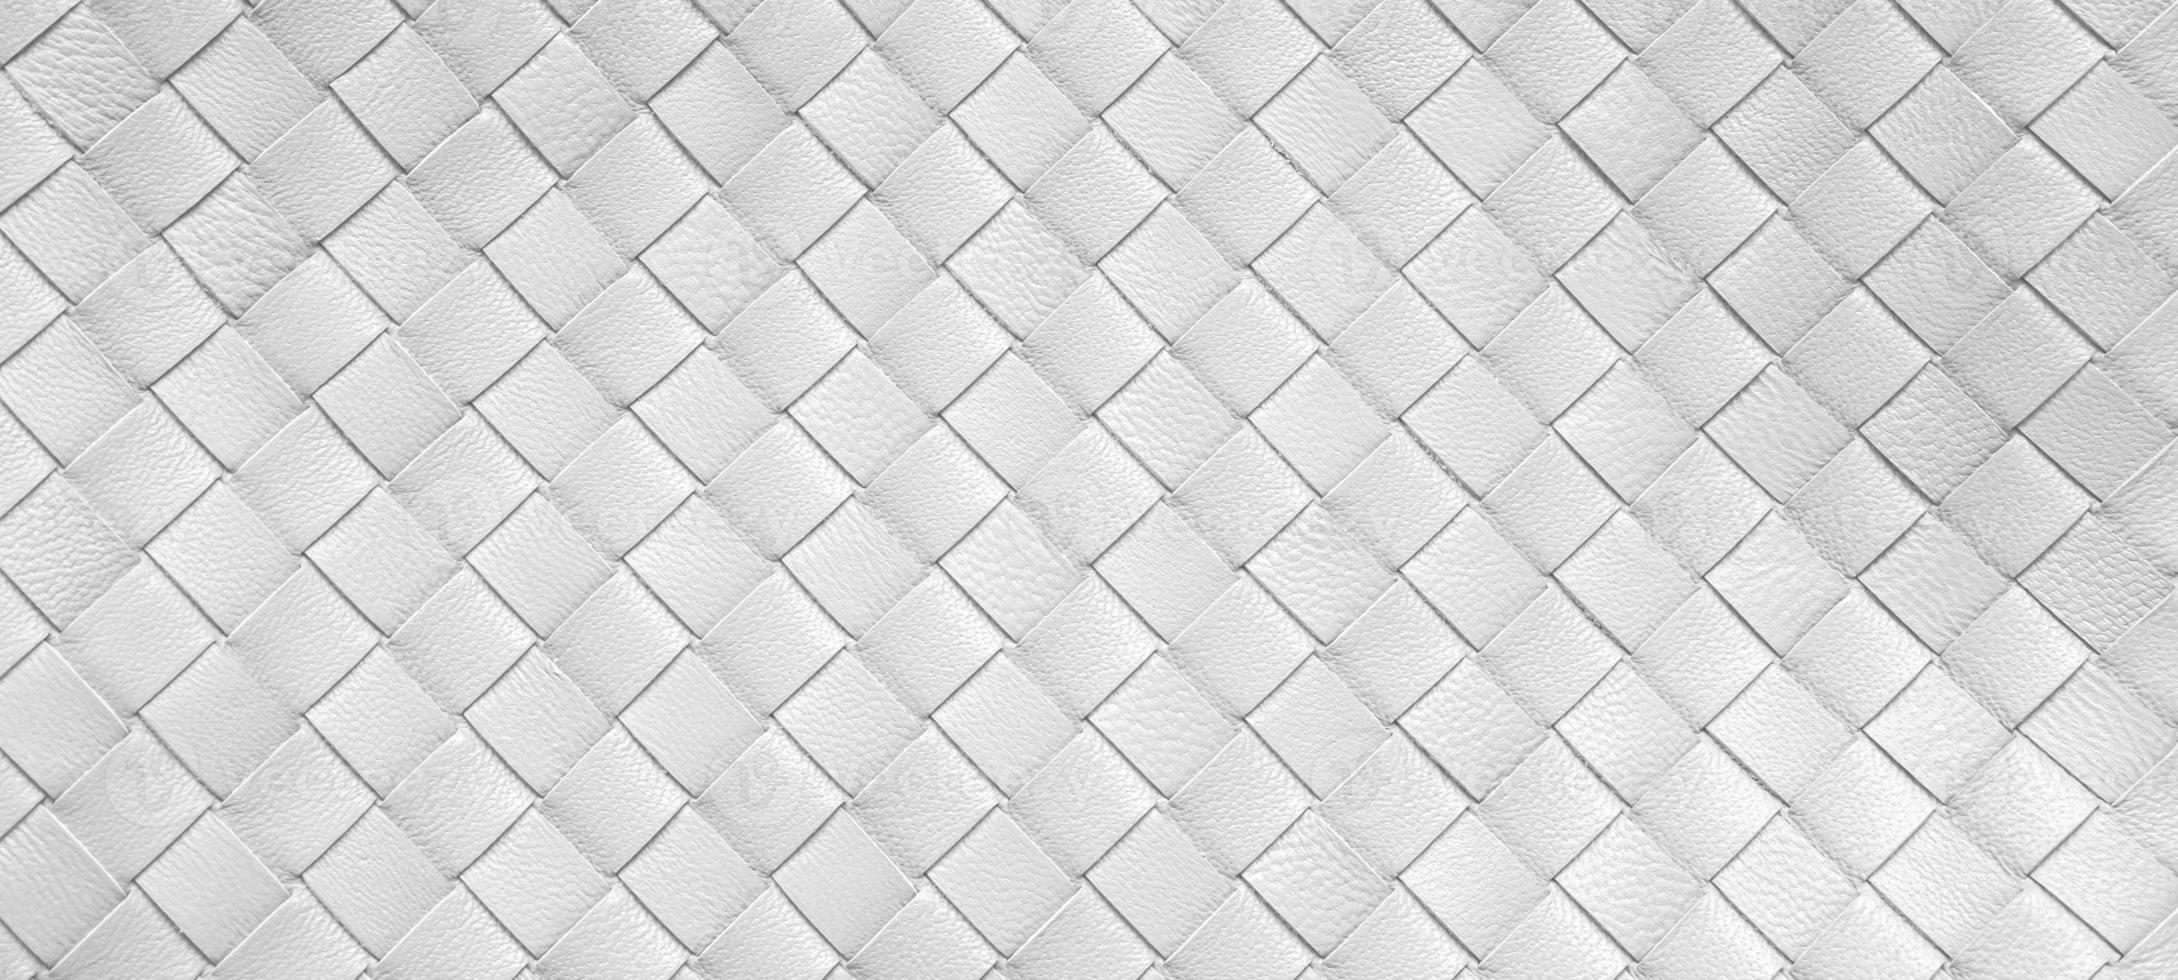 White weave leather texture pattern background photo